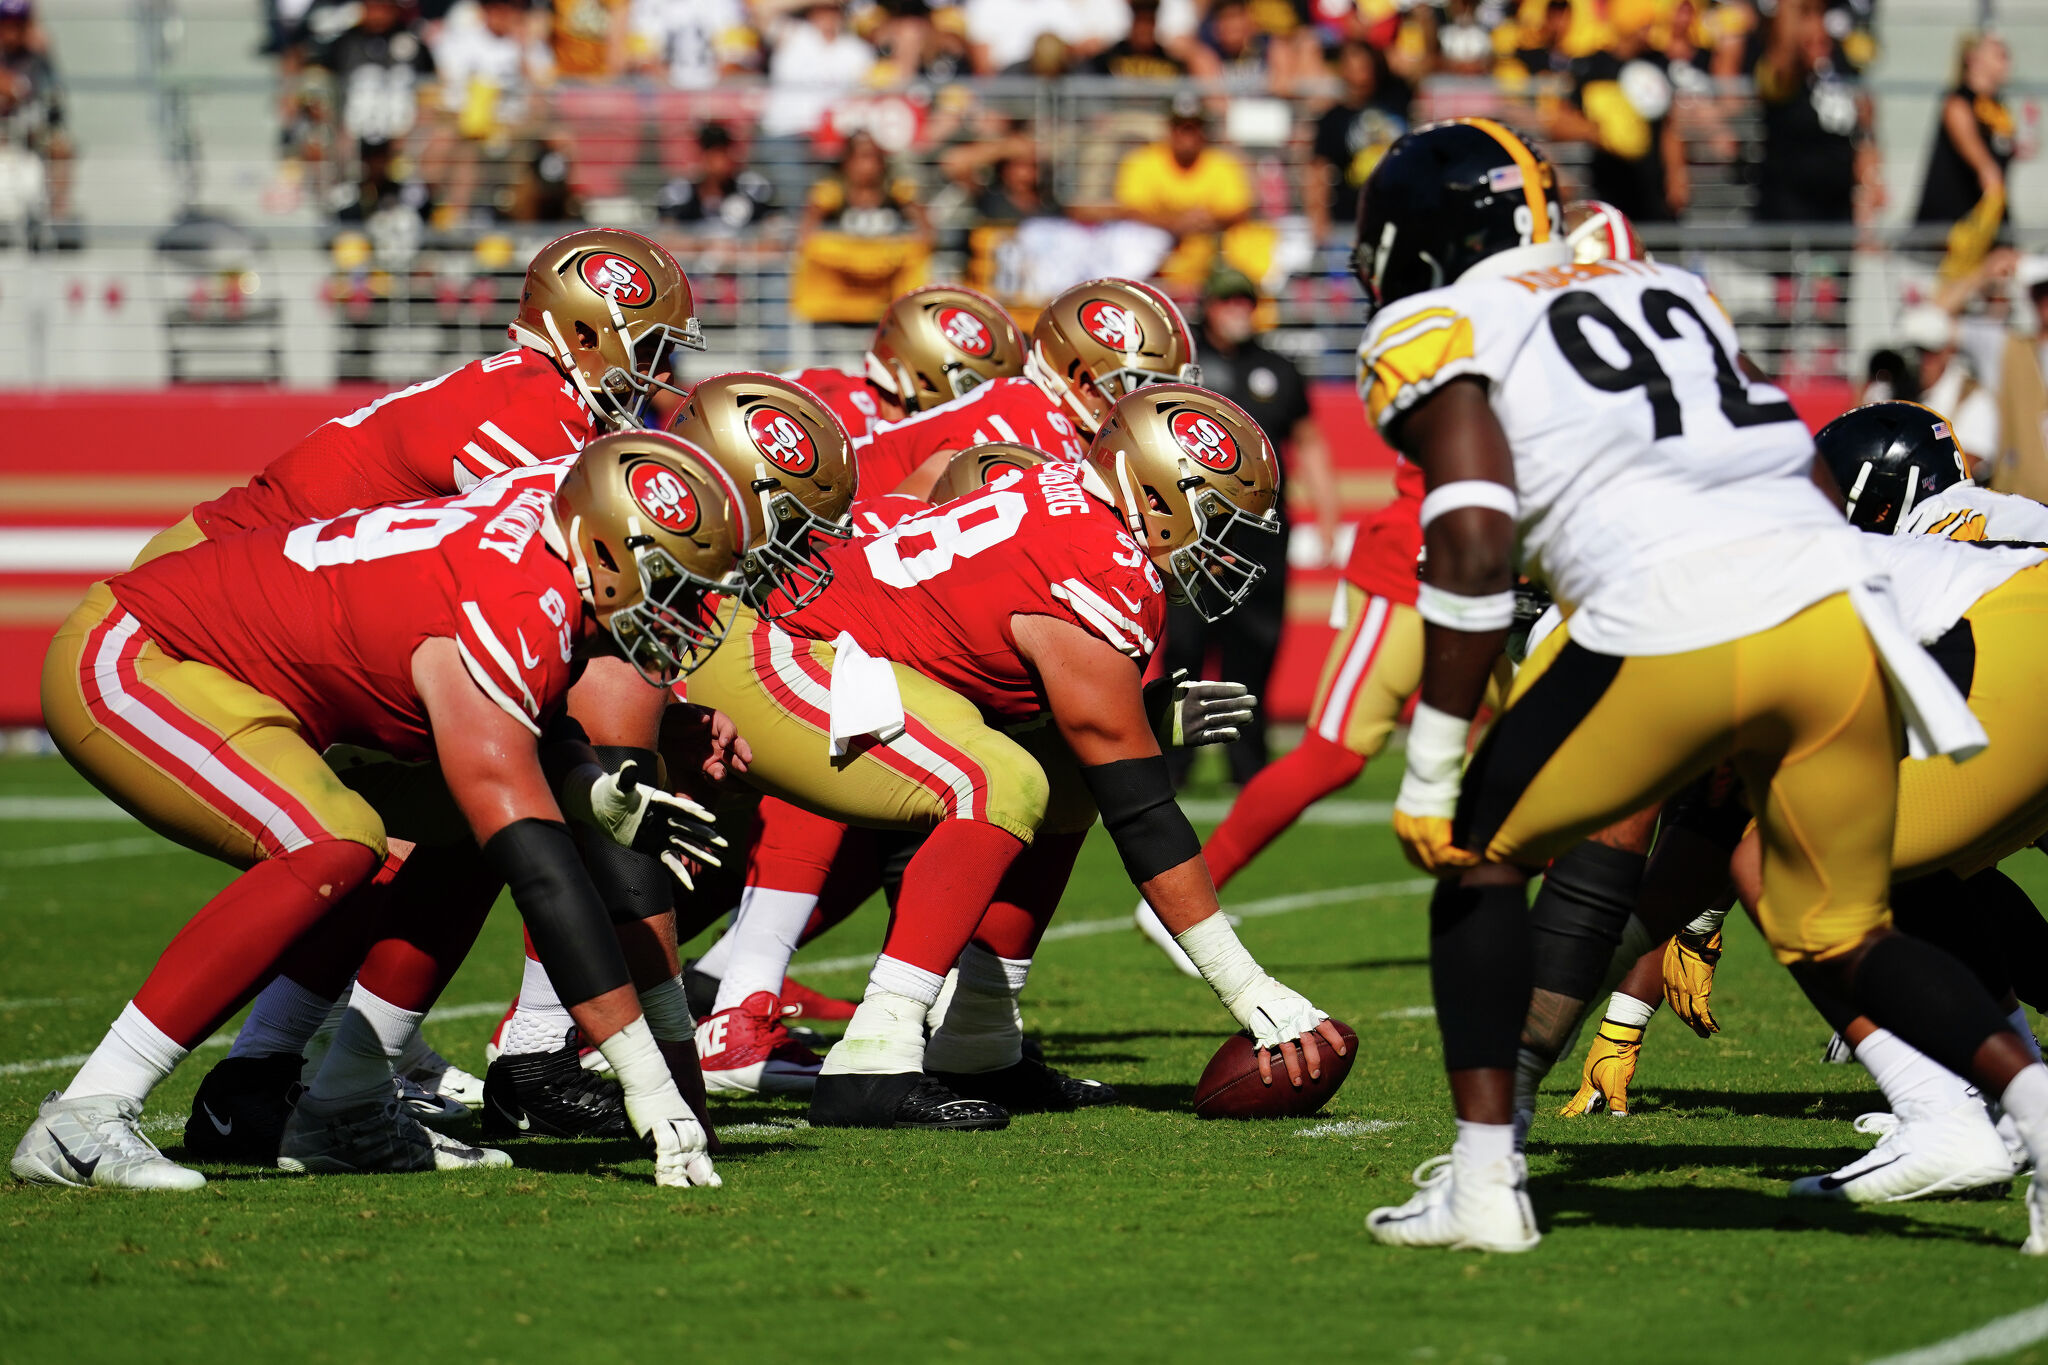 Why the 49ers-Steelers game was blacked out for many Calif. viewers